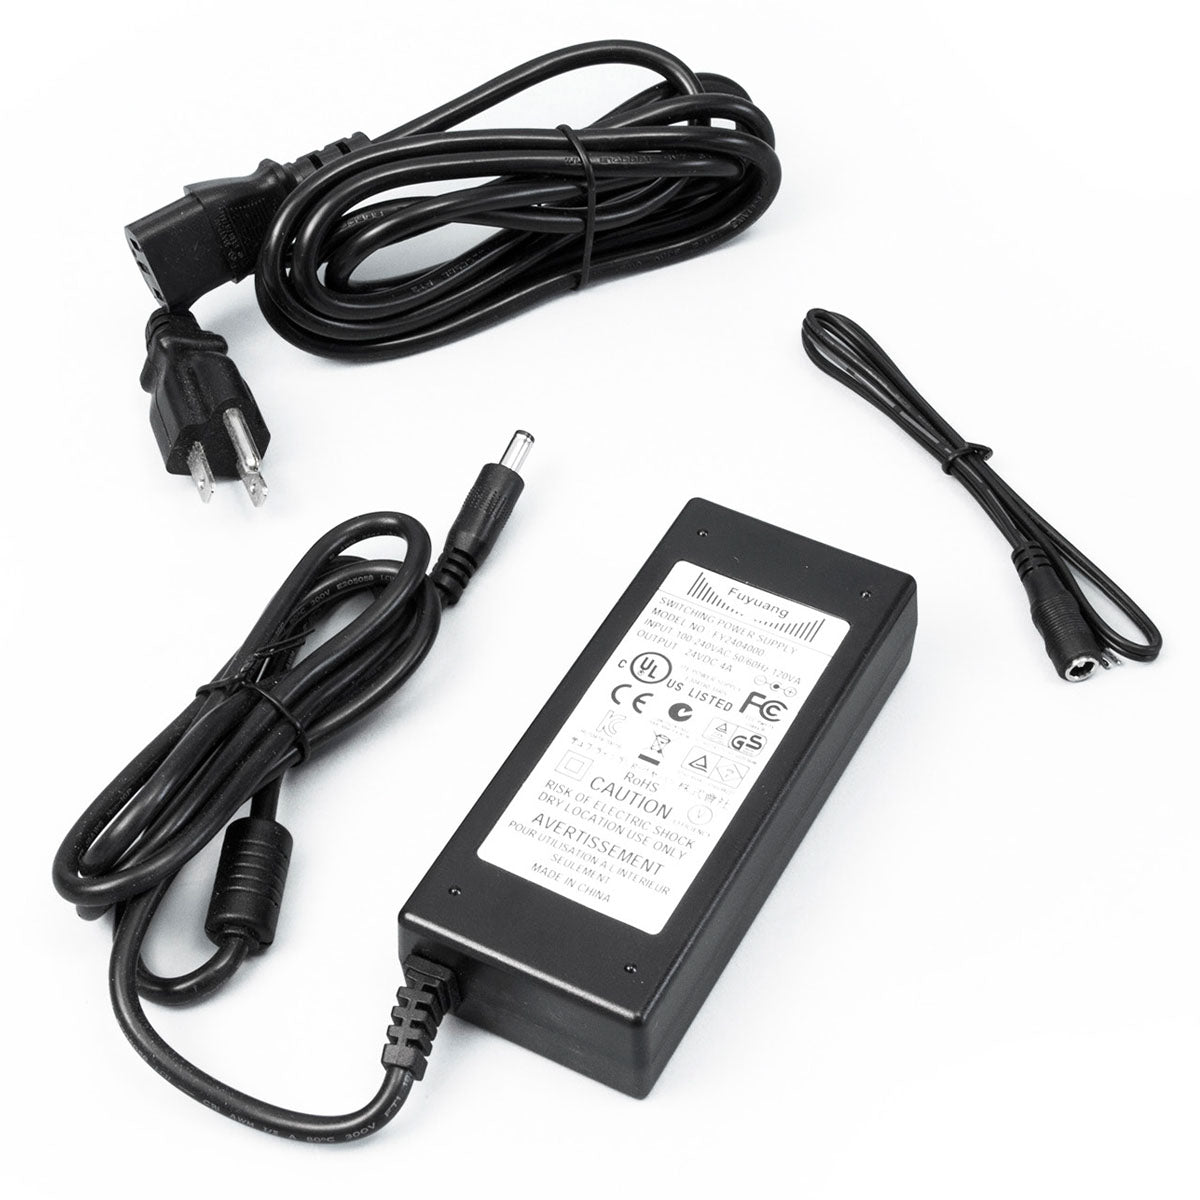 LTP 90 Watts, 24VDC LED Driver with Cord and Plug, 120V Input - Bees Lighting